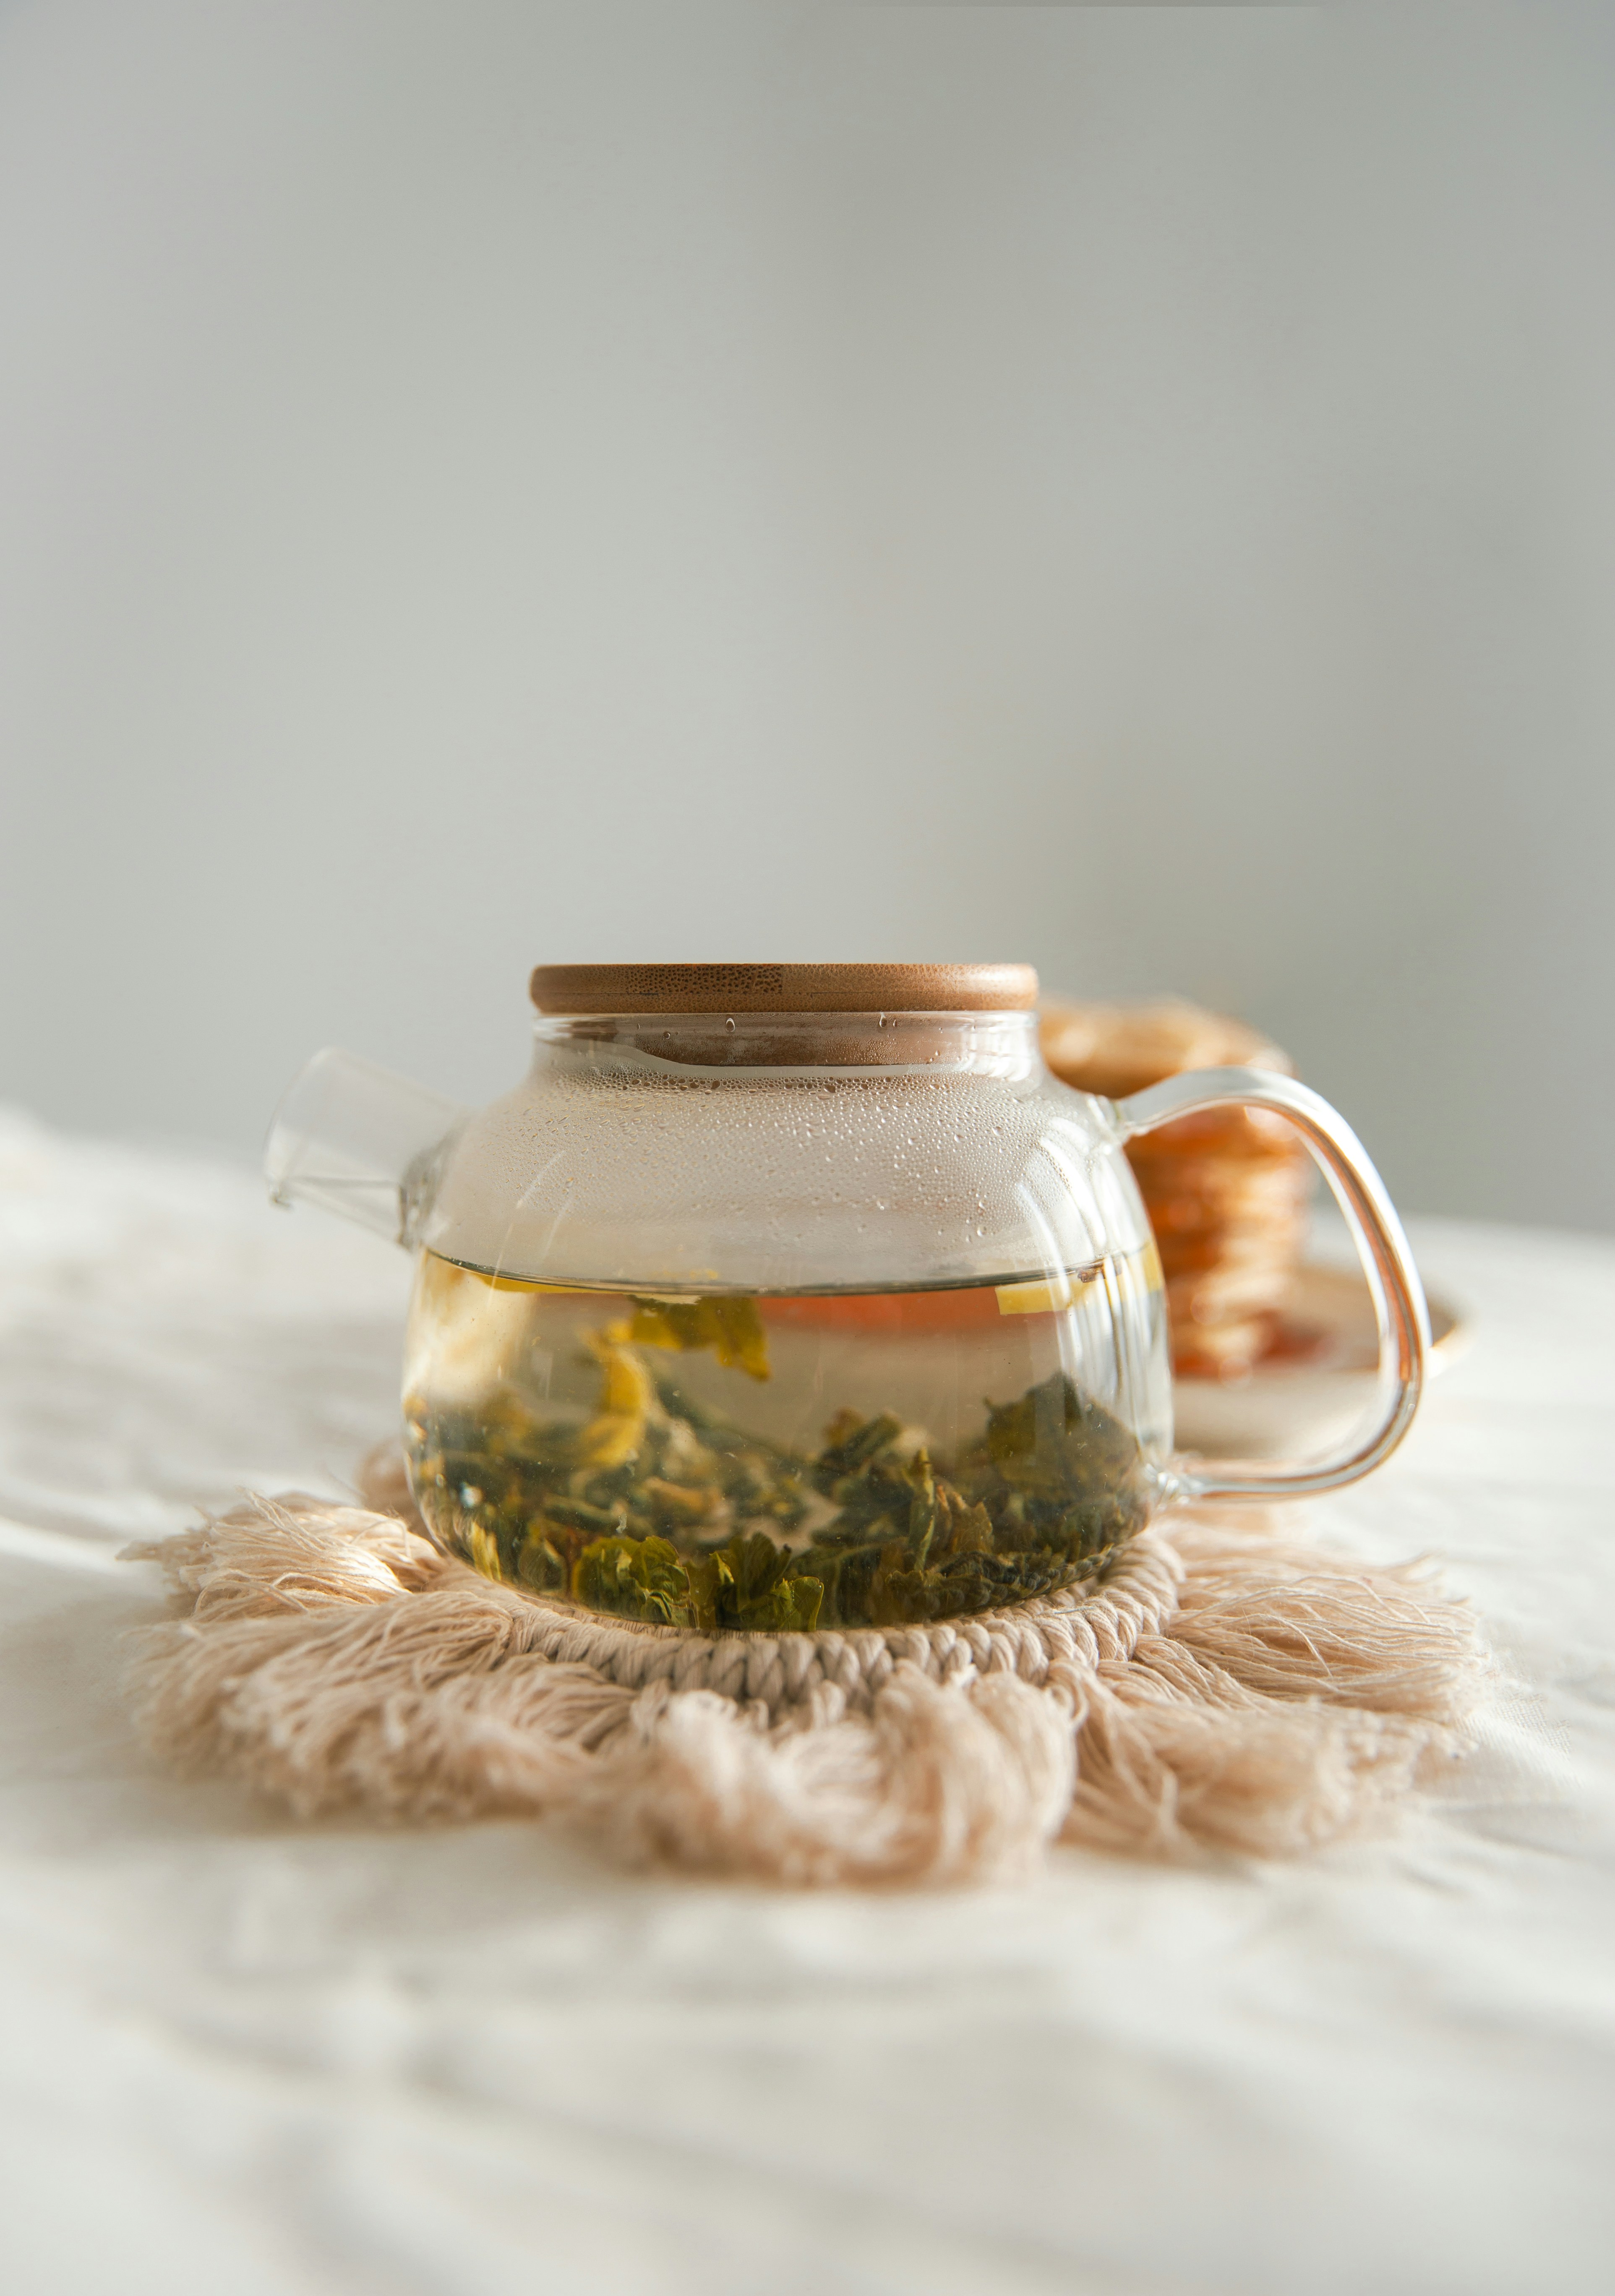 Mixing tea with alcohol is a contemporary take on the tea-brewing tradition. And with cocktails, you take creativity one step further to focus on enhancing the flavours of tea with a careful blend of spirits and mixers. 